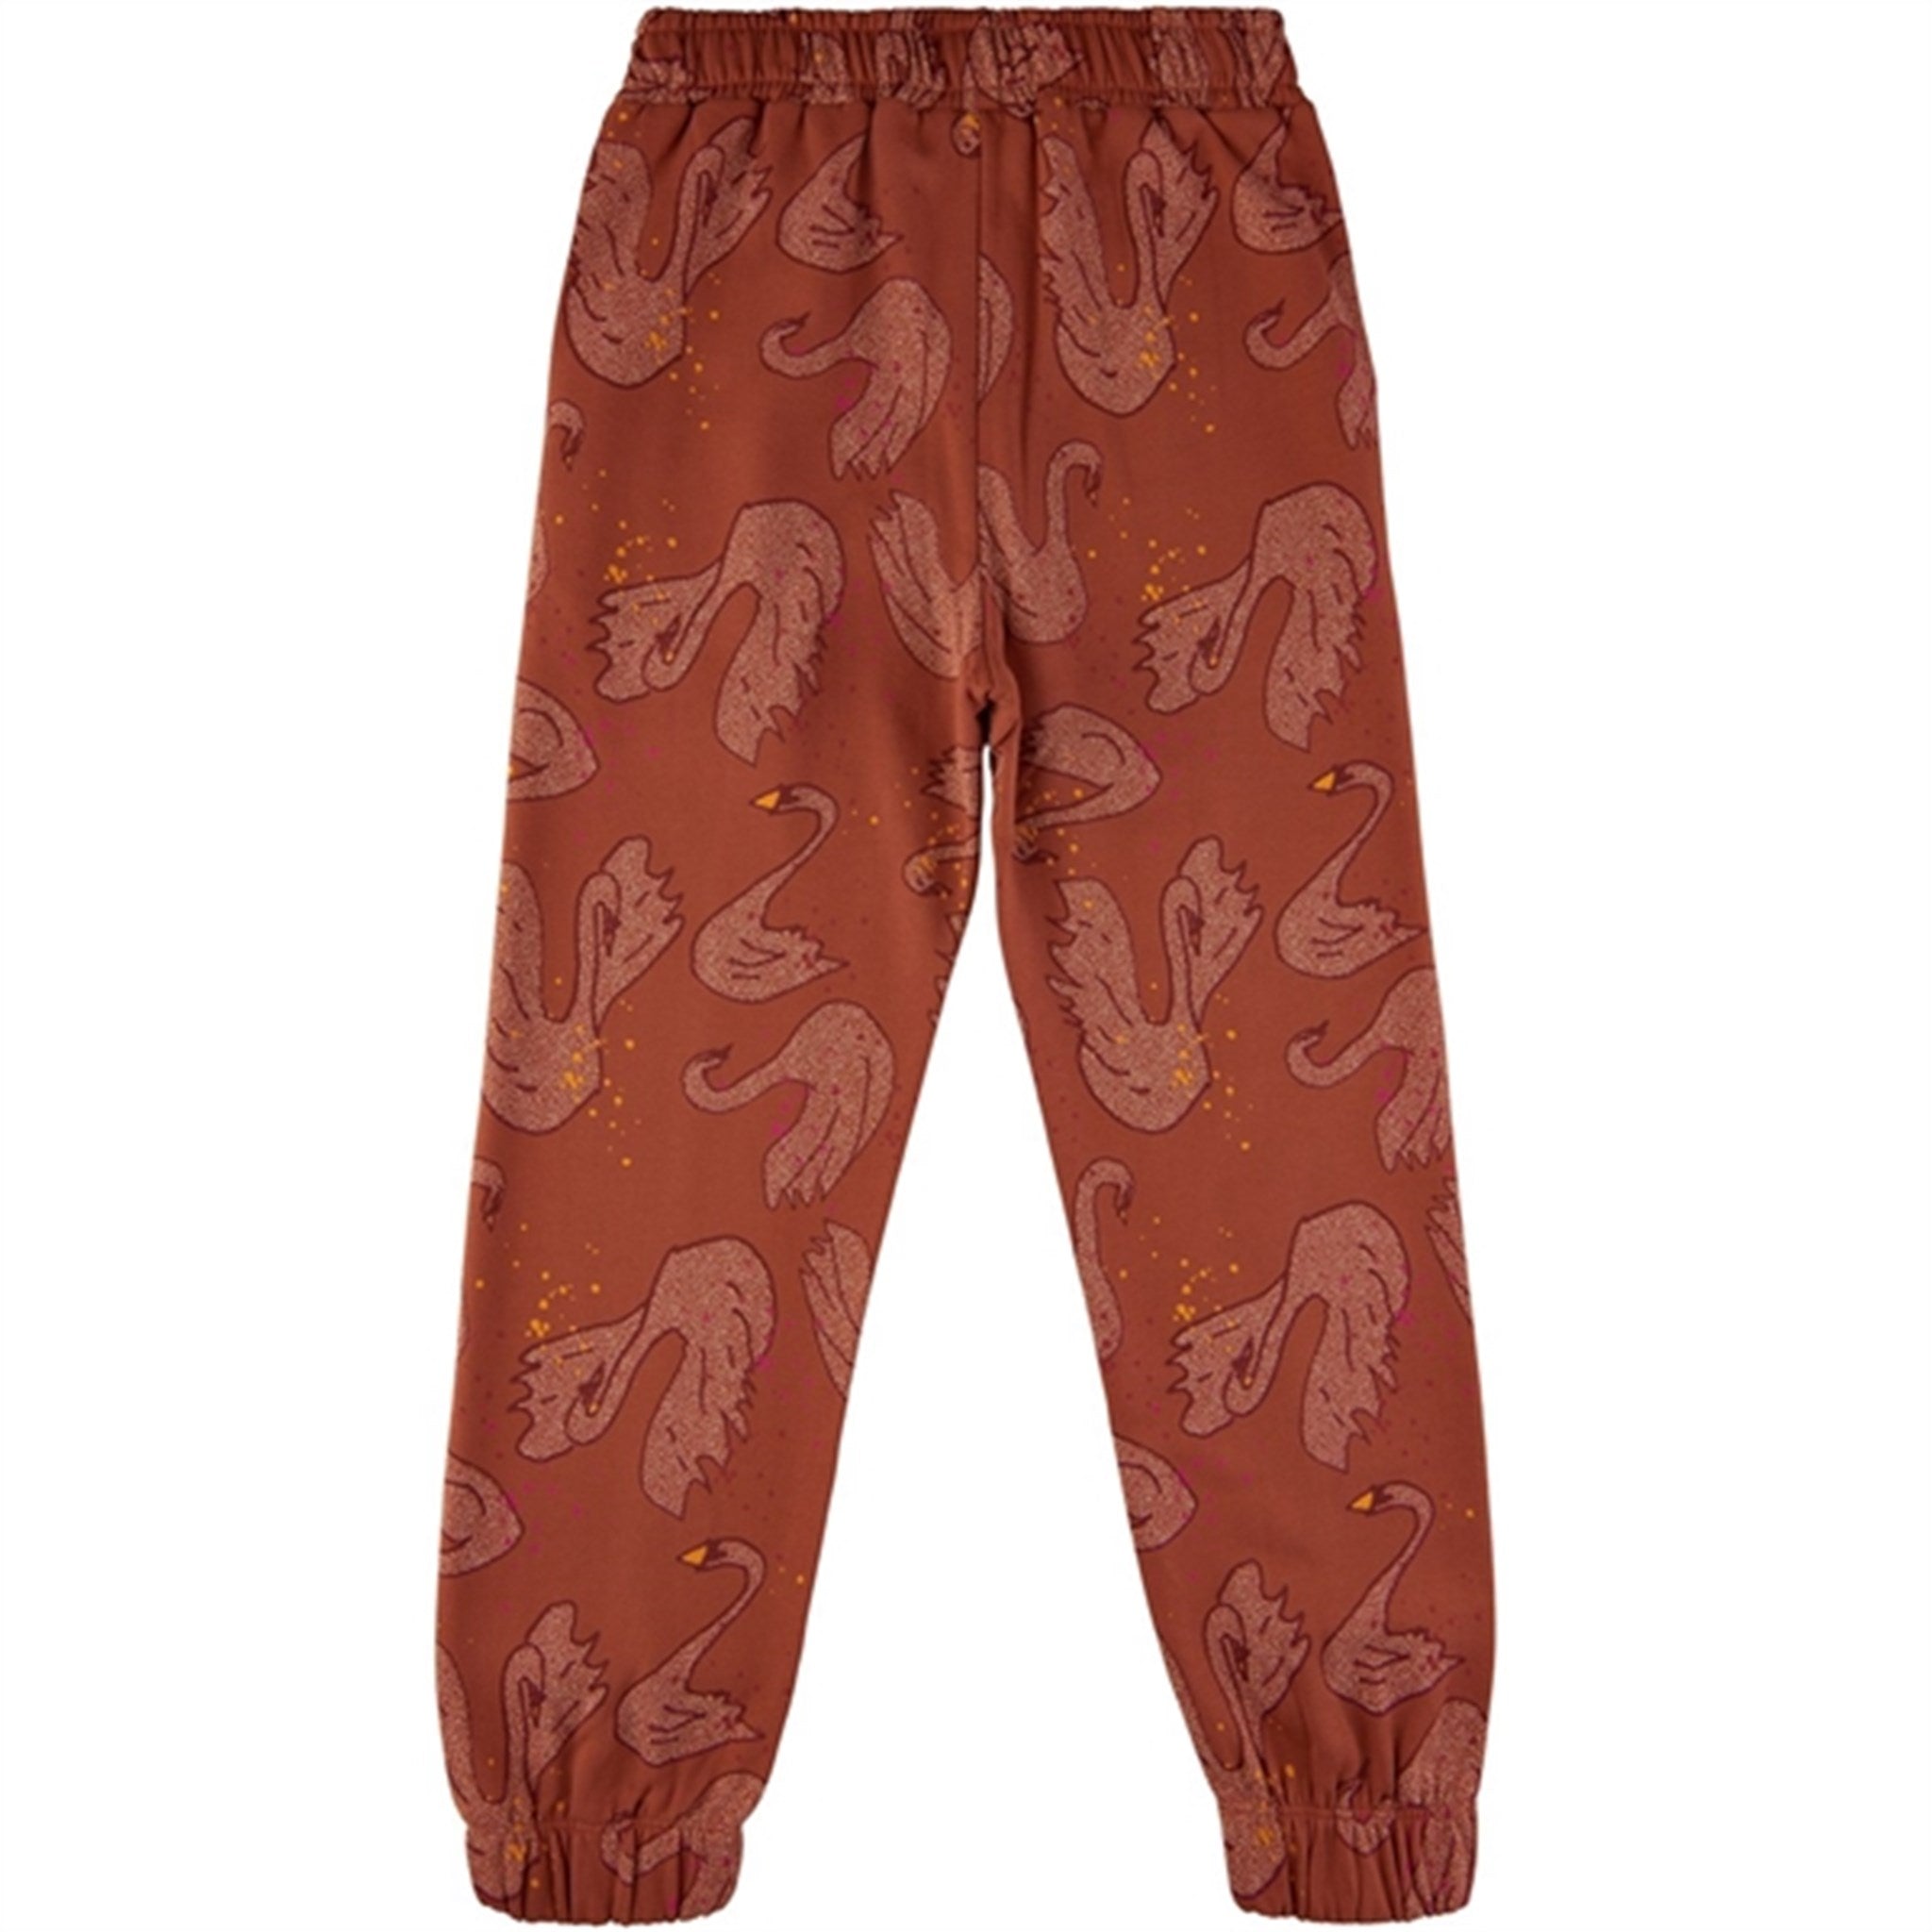 Soft Gallery Baked Clay Jagger Swan Sweatpants 2